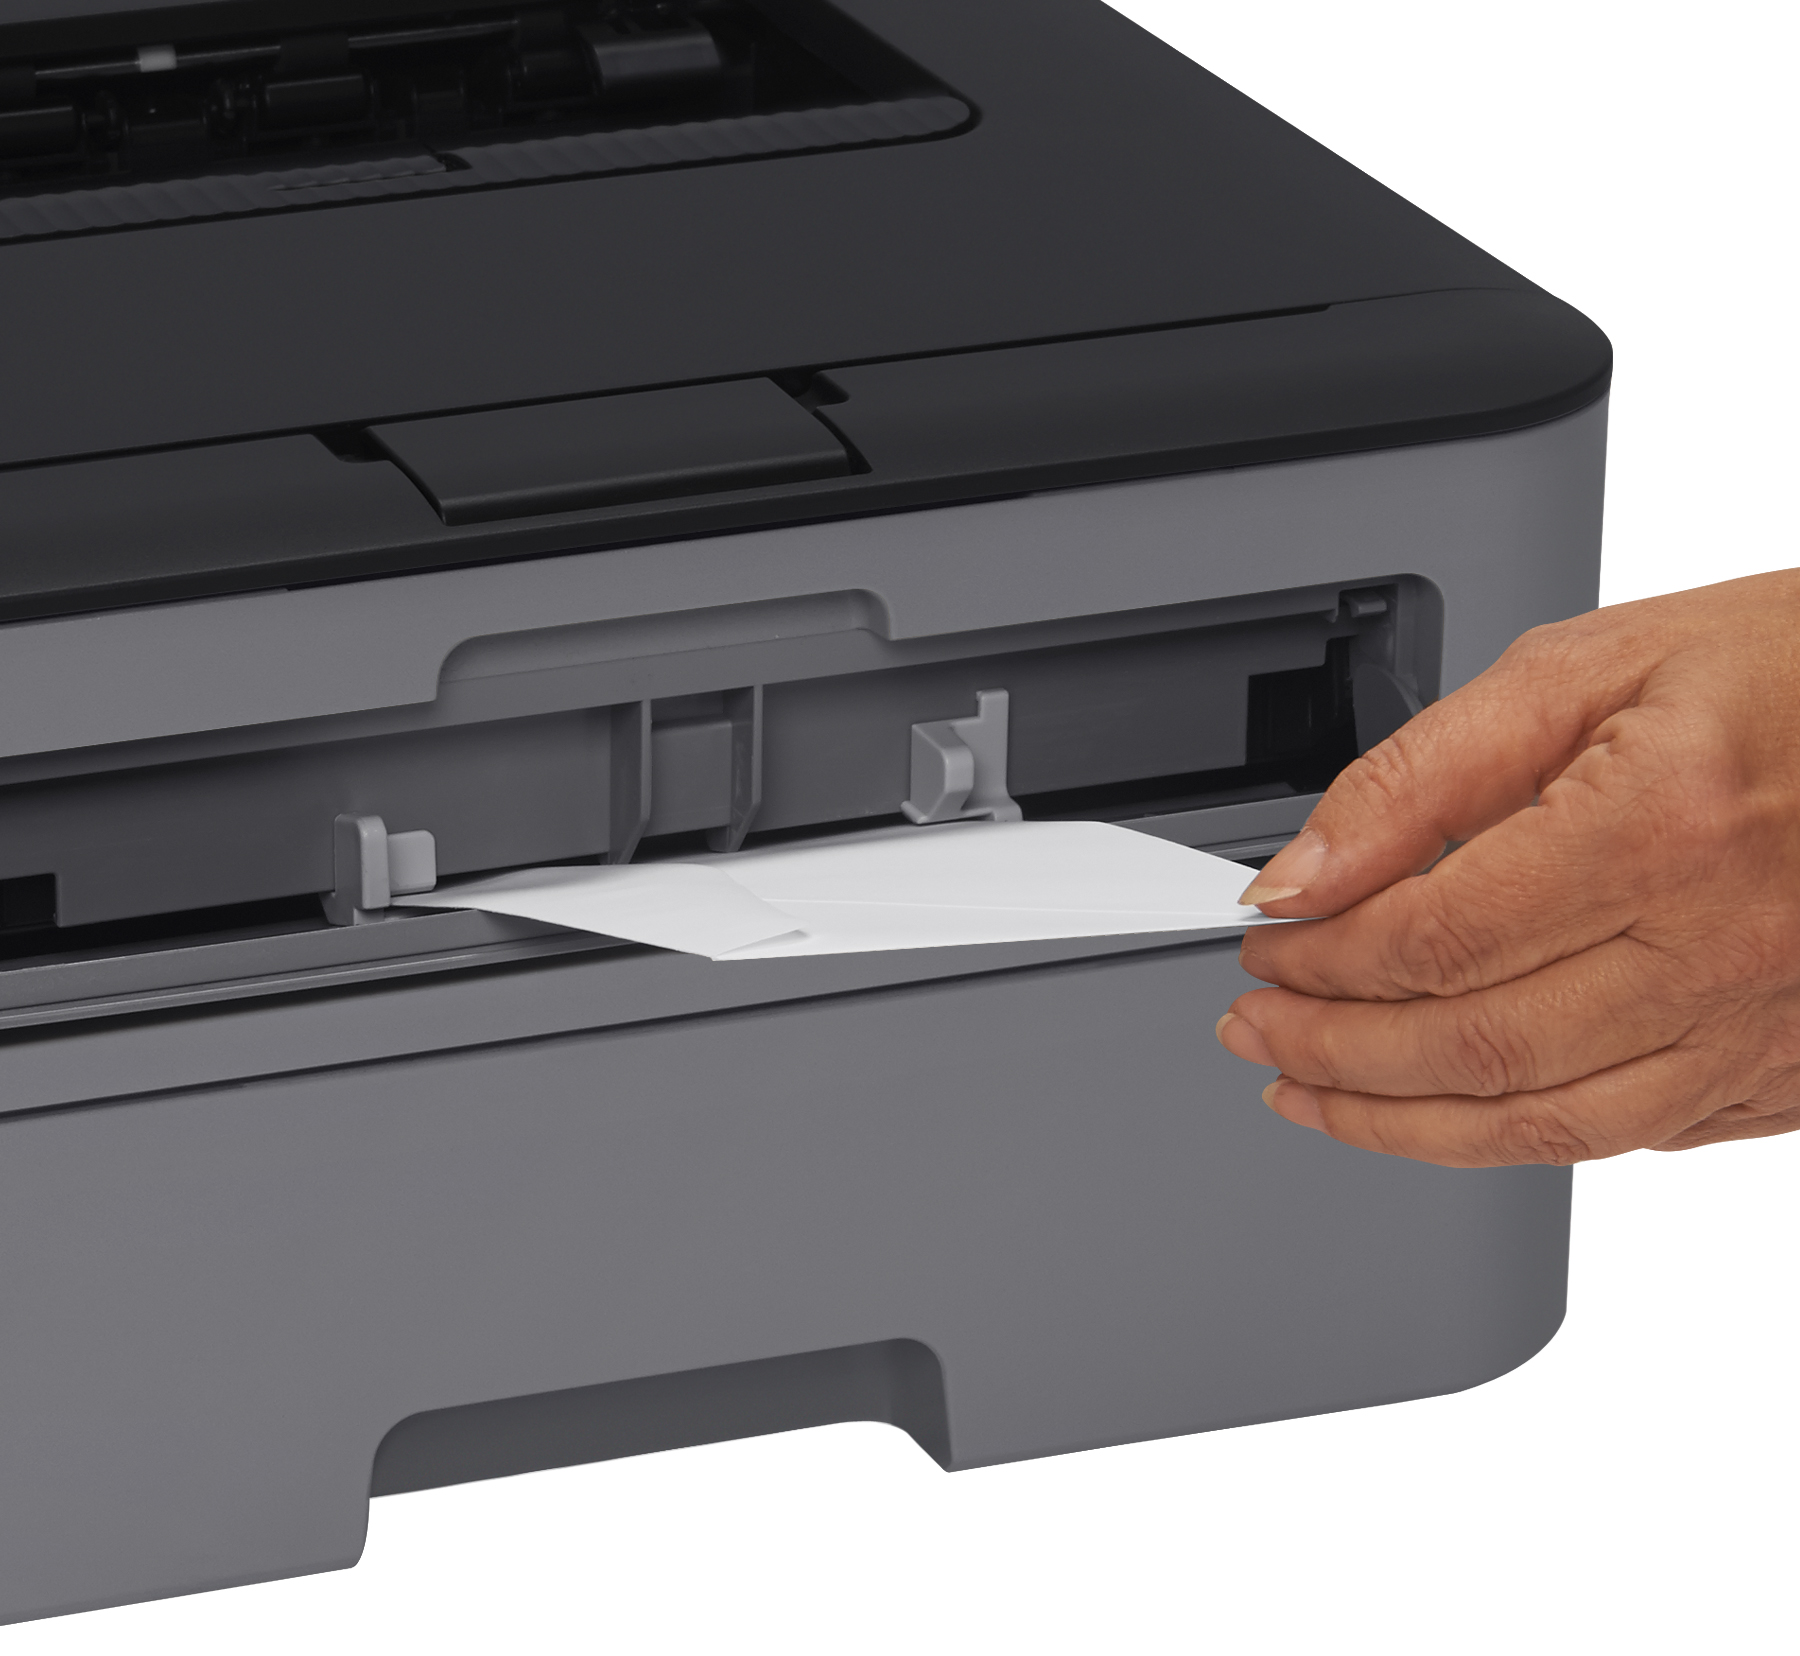 Brother Compact Monochrome Laser Printer, HL-L2315DW, Wireless Printing, Duplex Two-Sided Printing - image 5 of 6